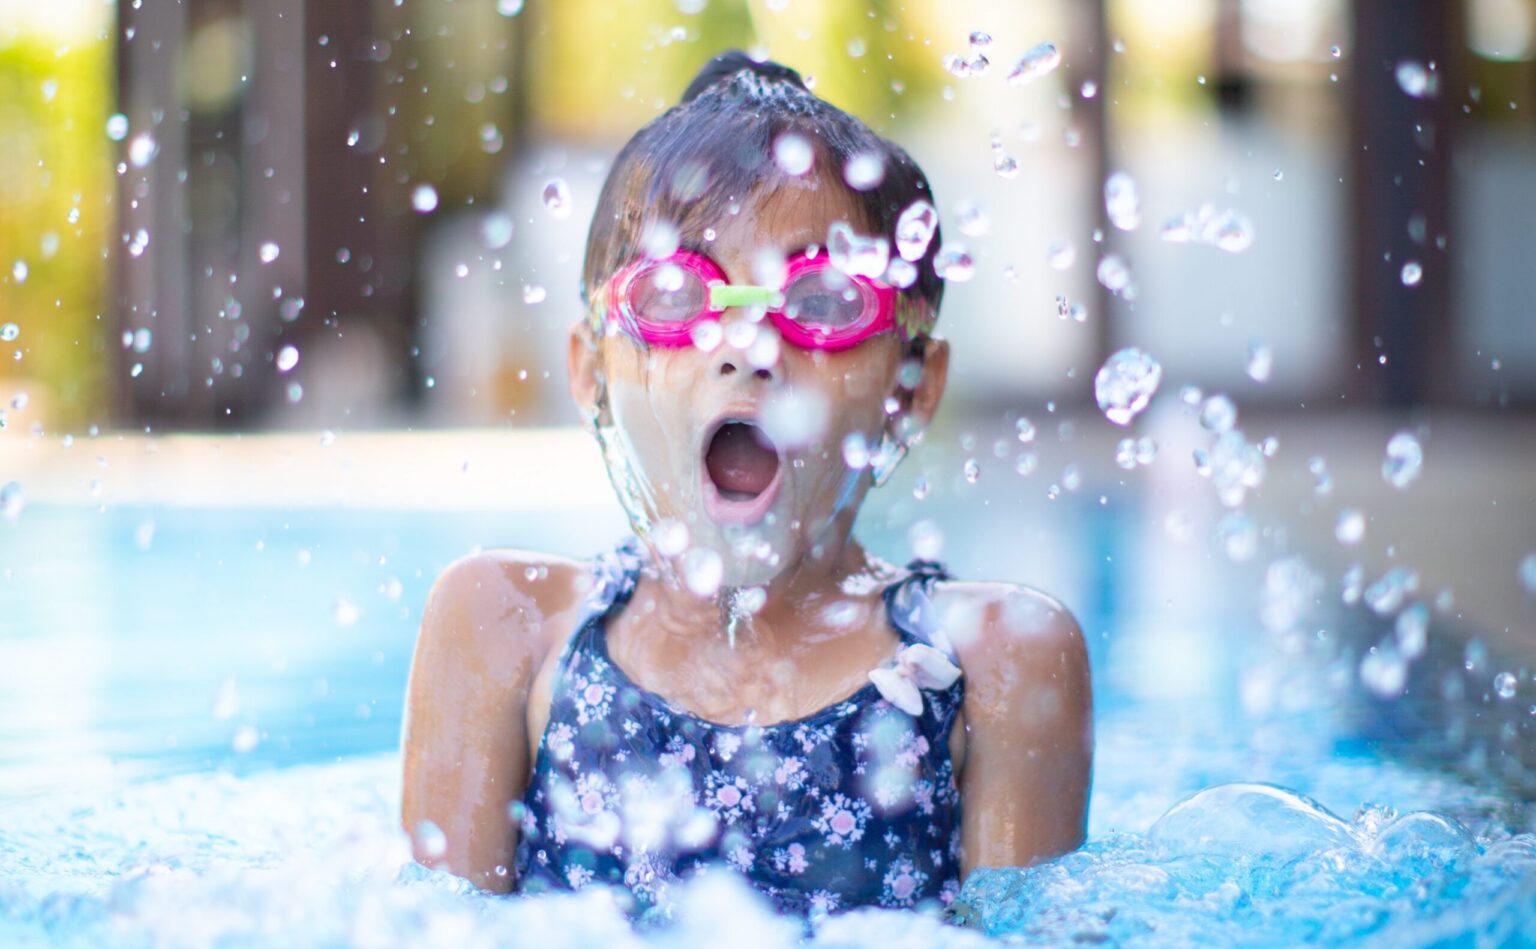 Little girl gasping as she splashes in pool with goggles on